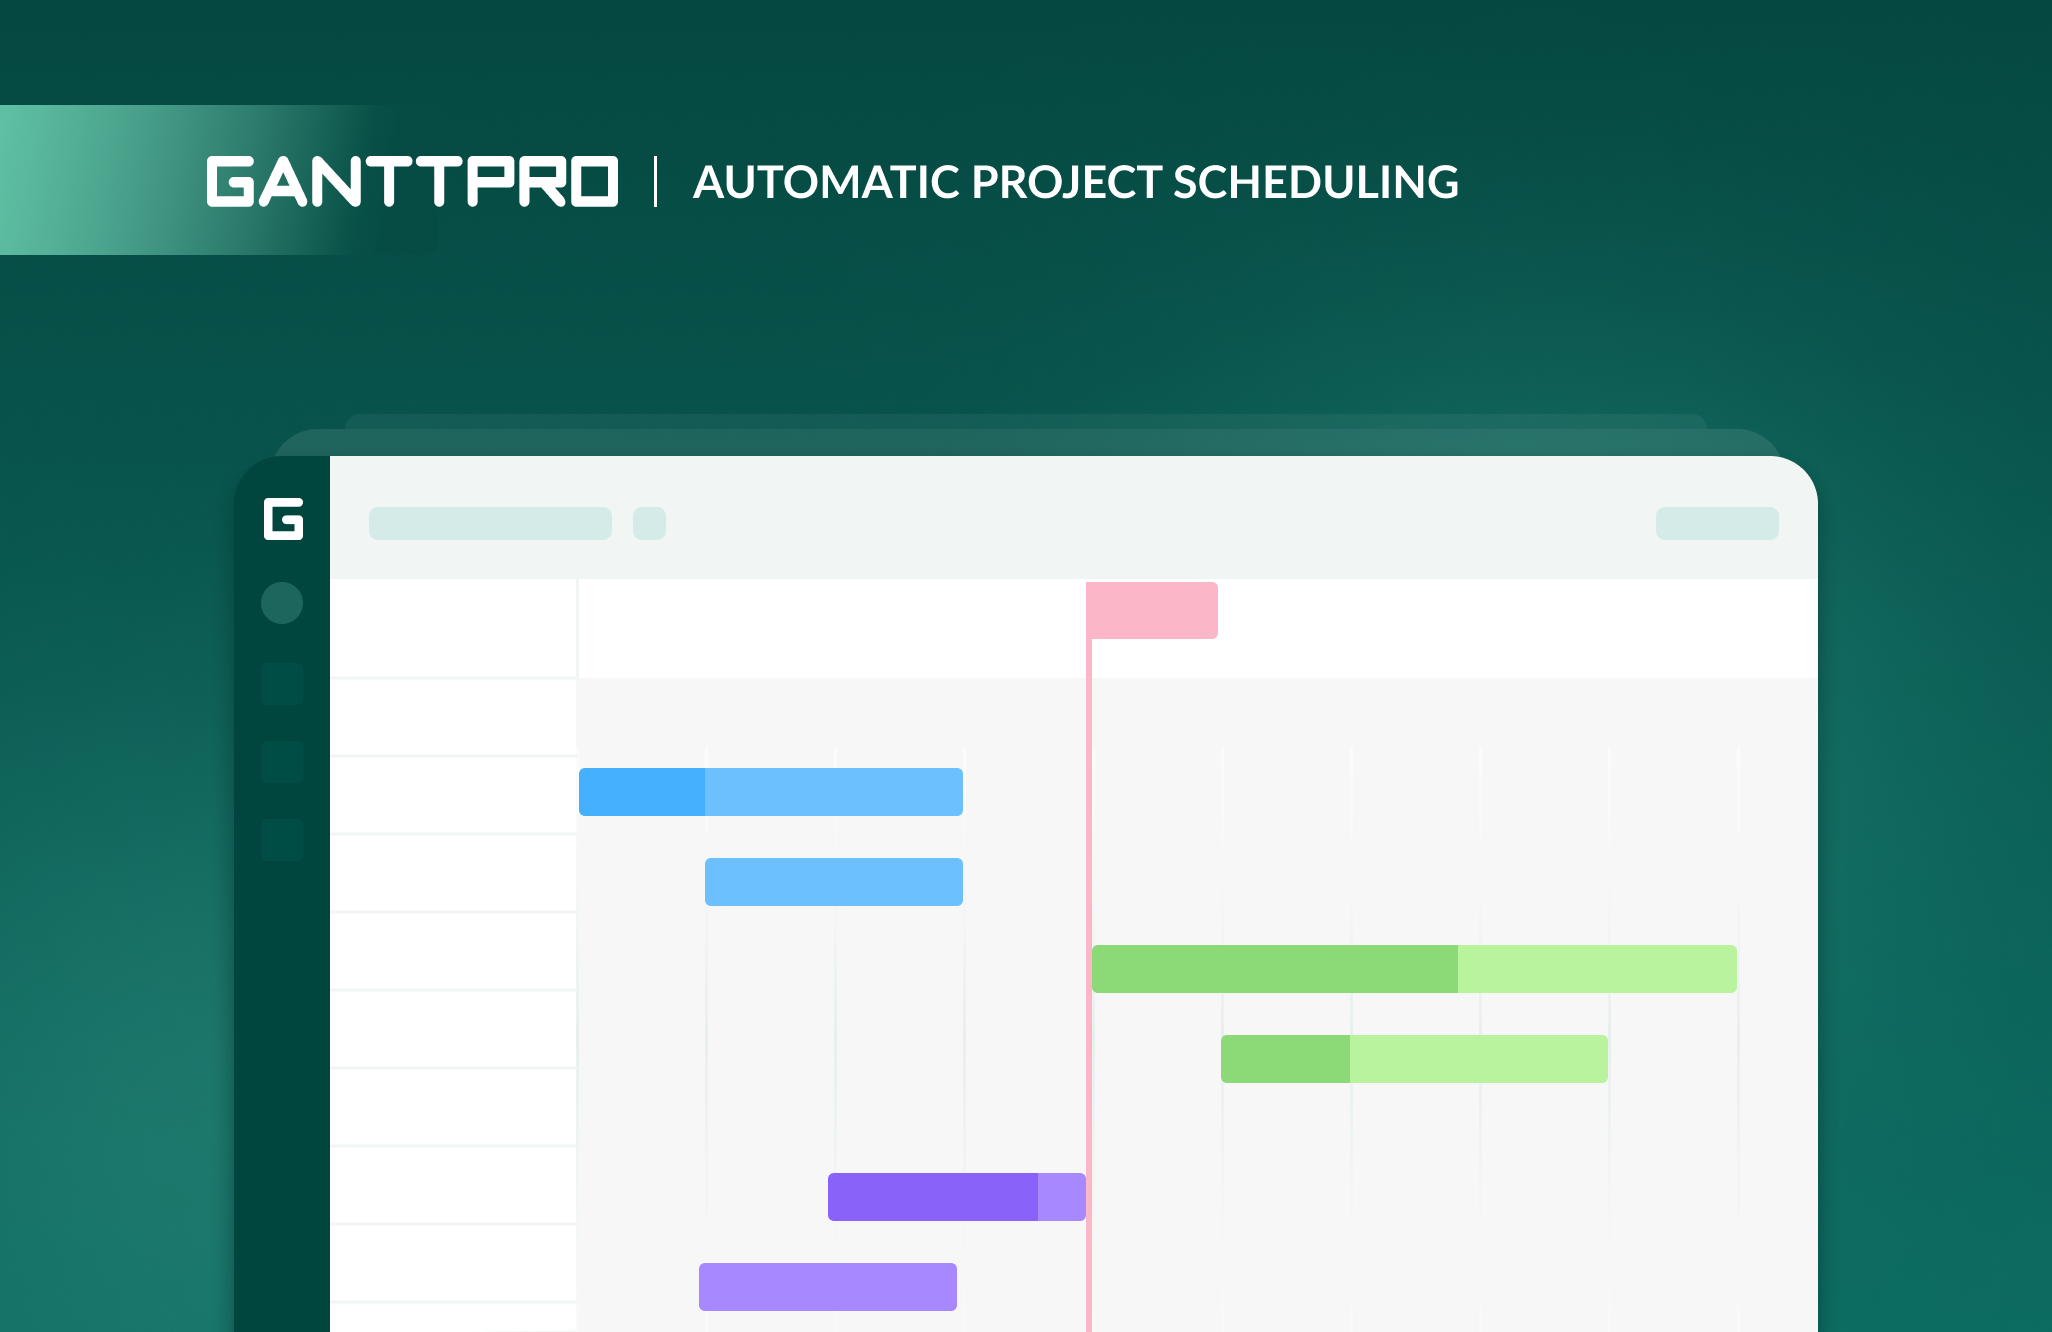 Automatic project scheduling in Gantt charts